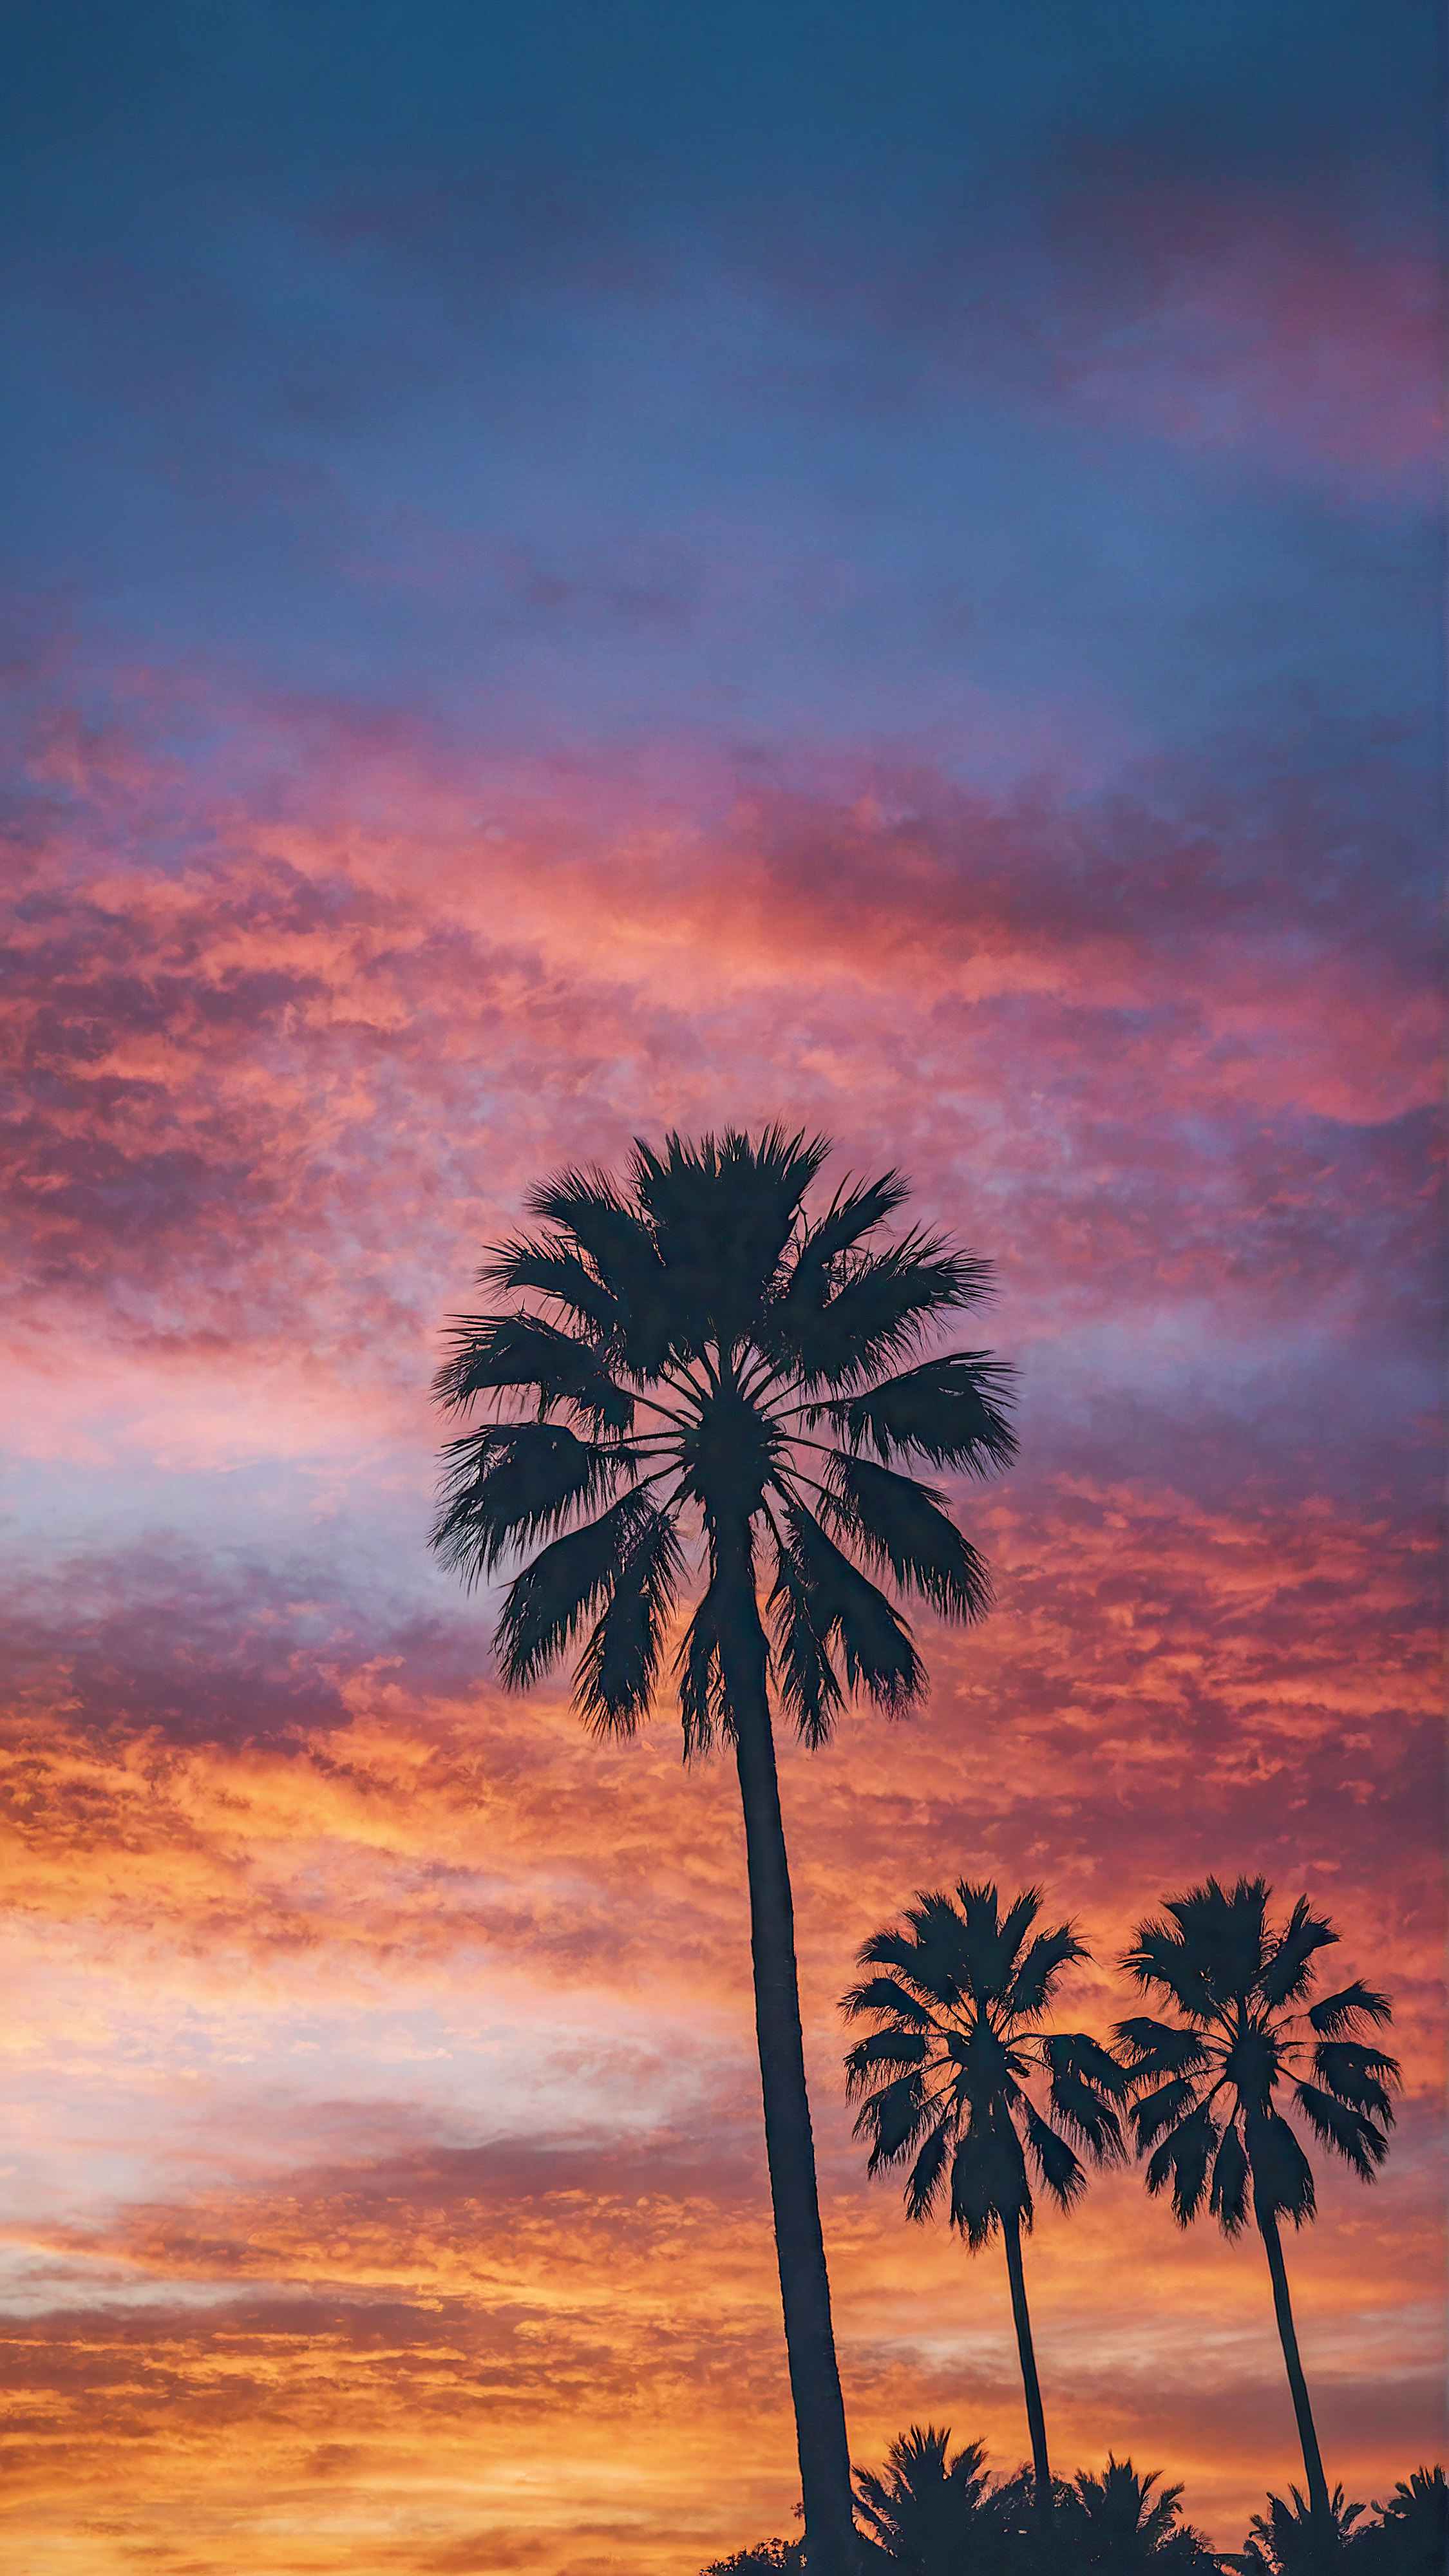 Capture the essence of a tropical sunset with our iPhone screensaver, featuring several palm trees silhouetted against a vibrant evening sky. Your device will be a window to paradise.